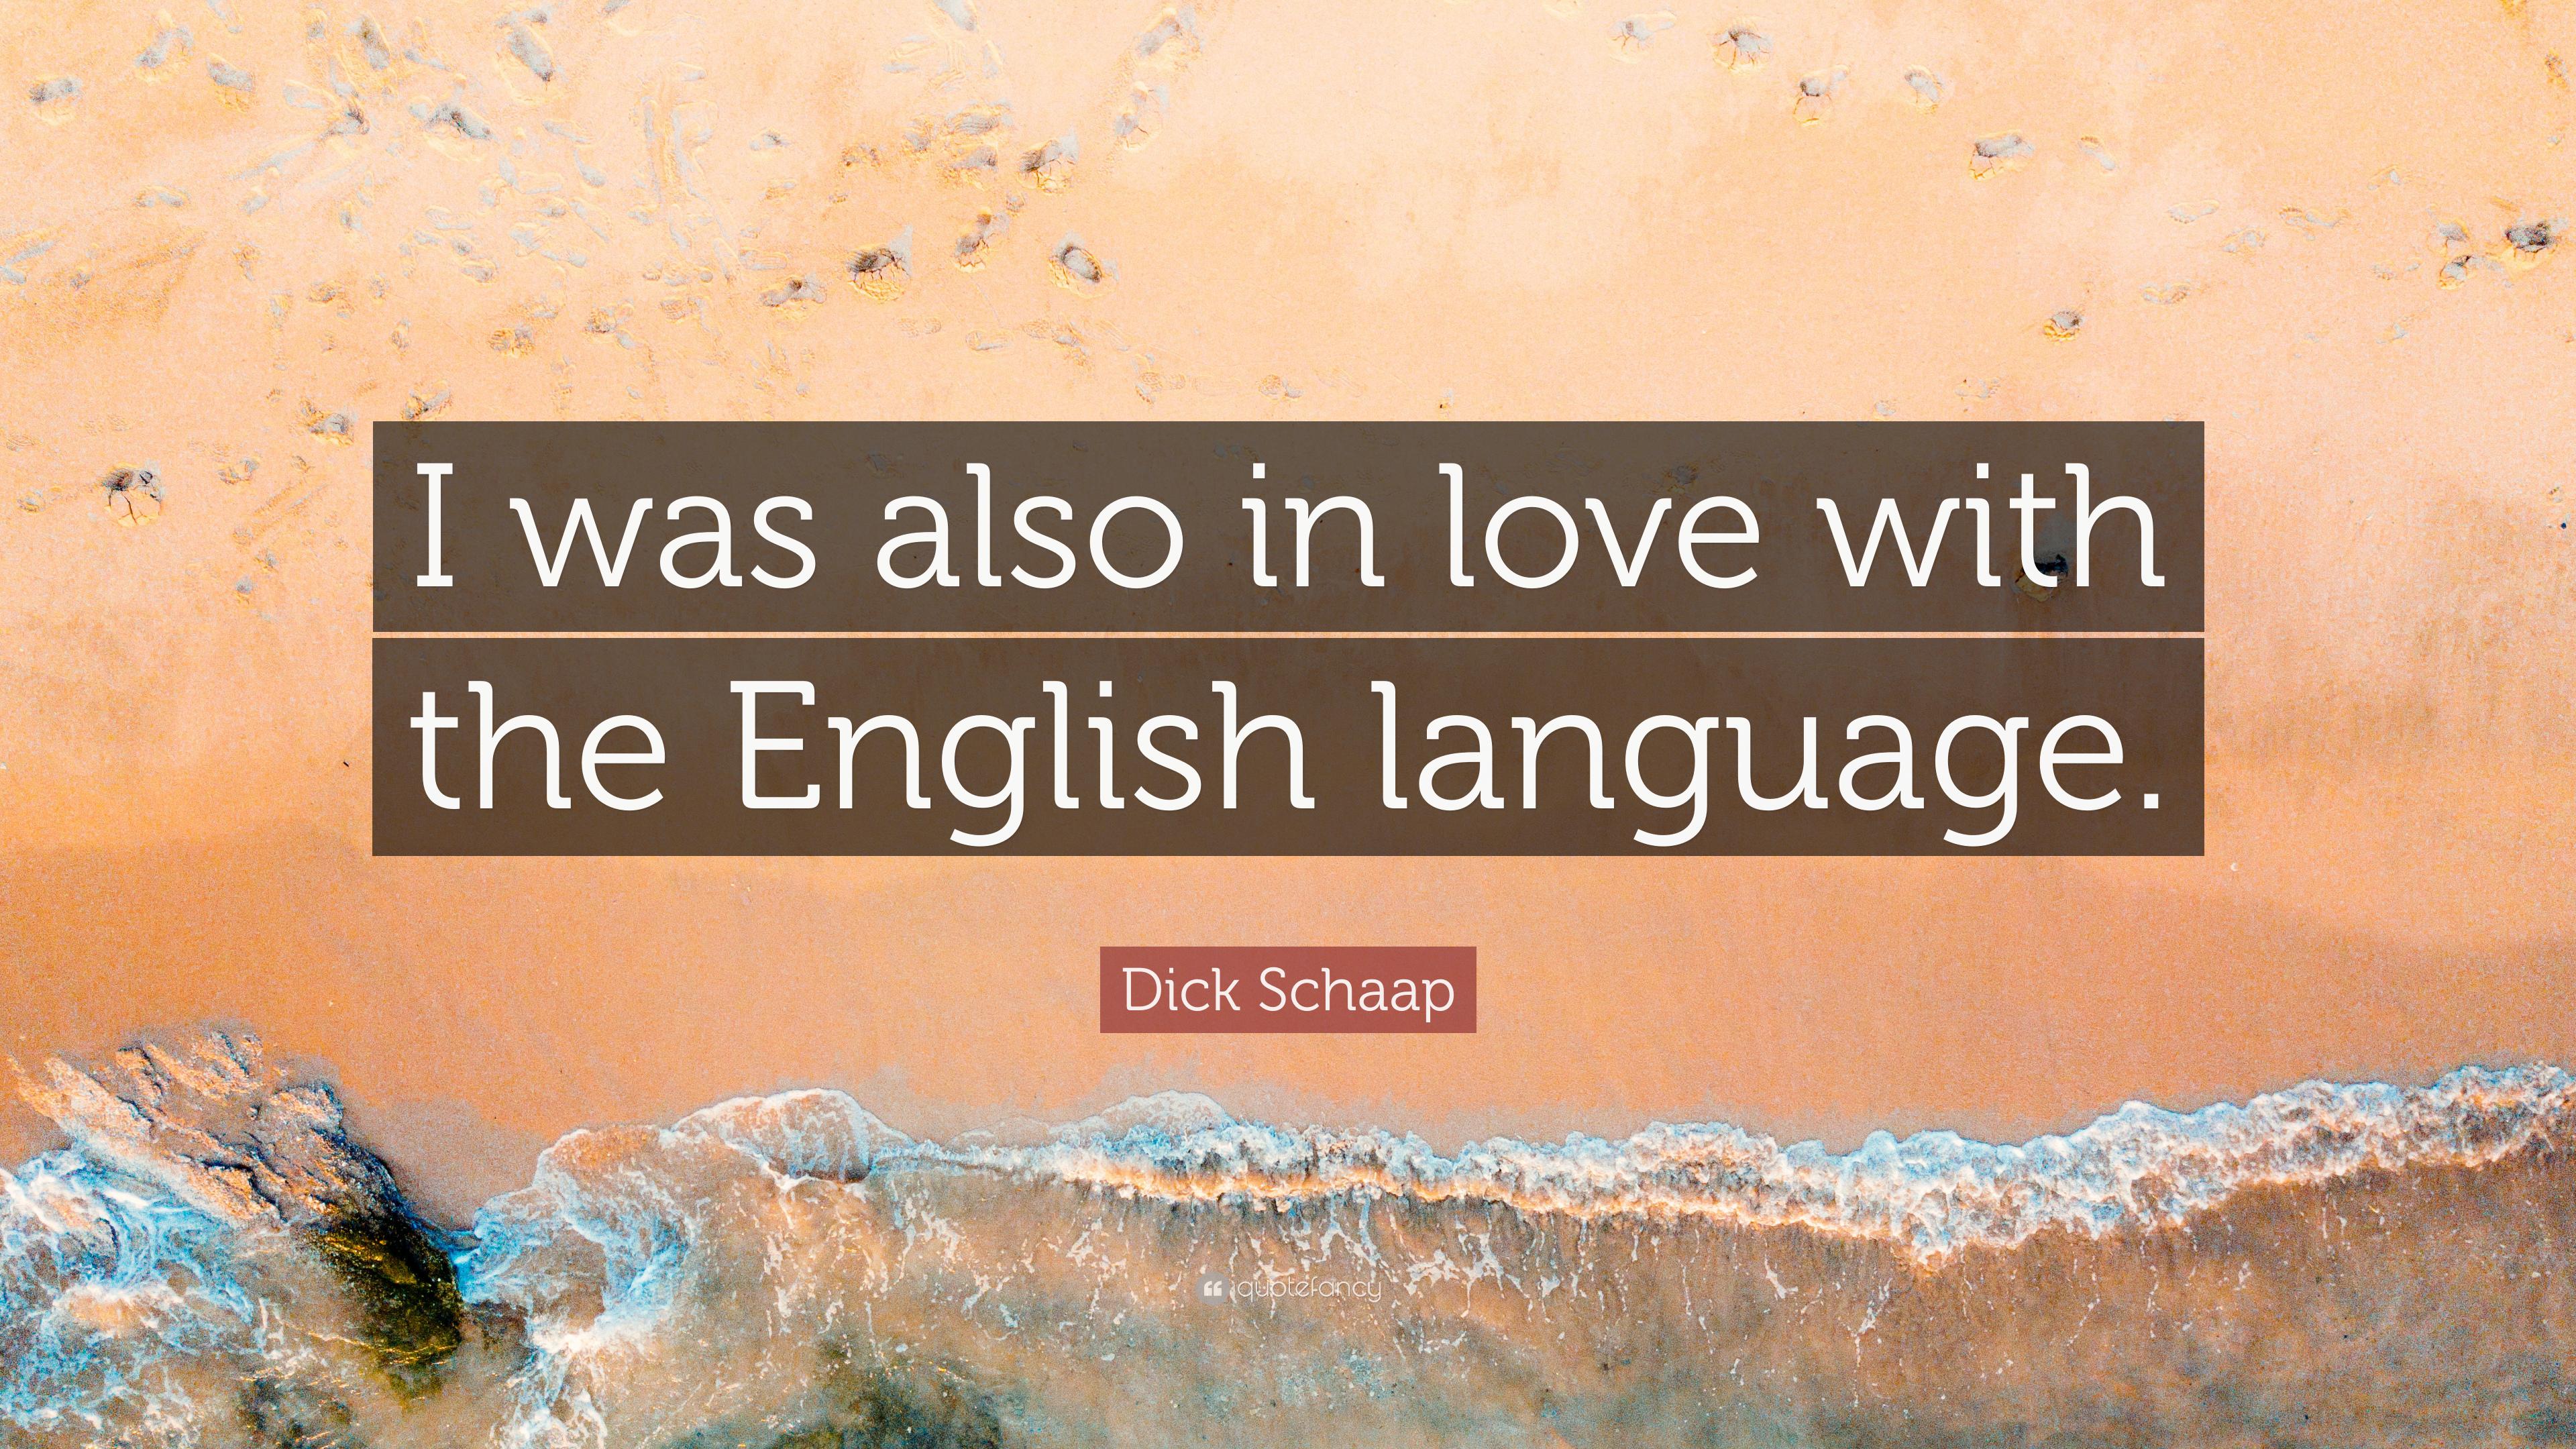 Dick Schaap Quote: “I was also in love with the English